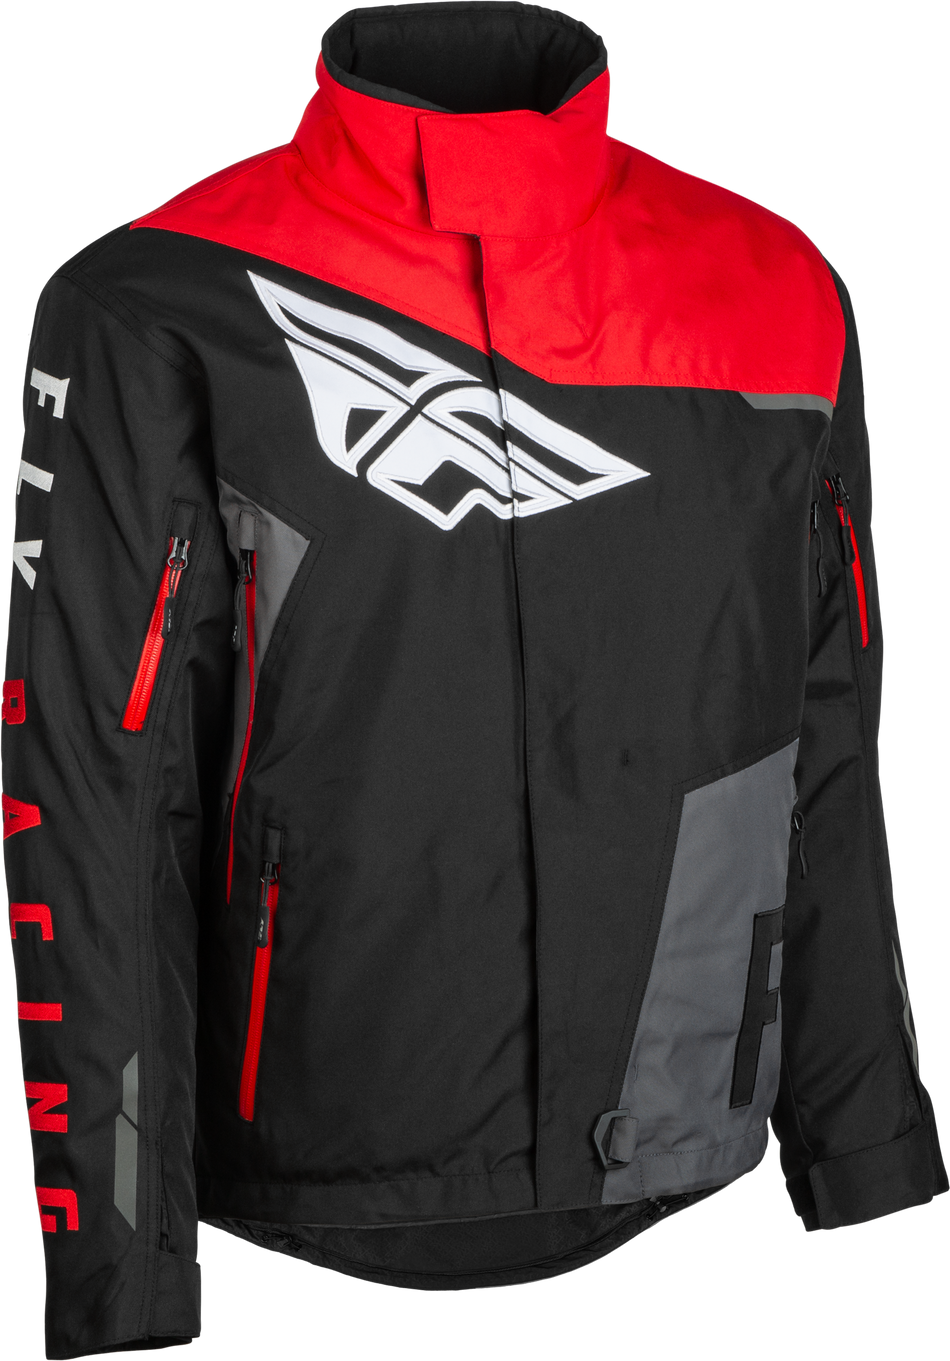 FLY RACING Youth Snx Pro Jacket Black/Grey/Red Yl 470-4117YL